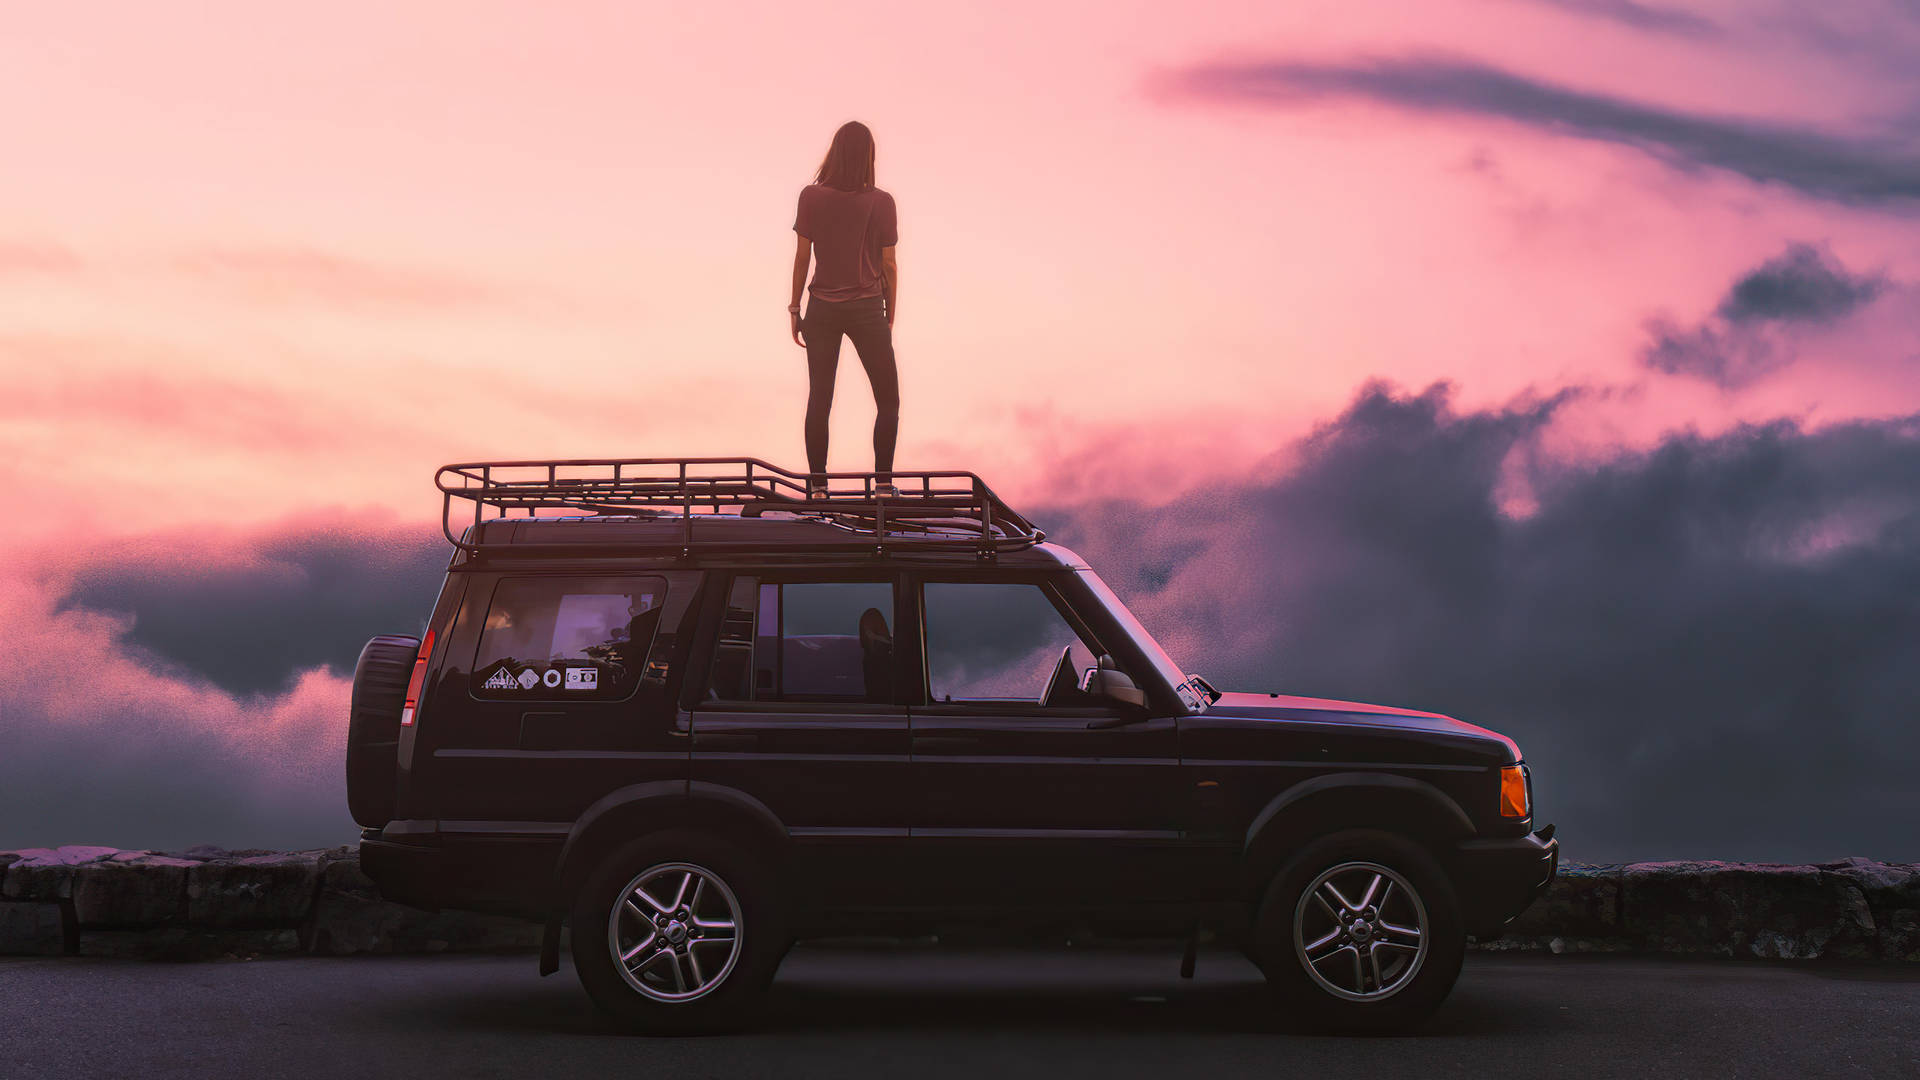 Aesthetic 4k Car With Woman On Top Picture